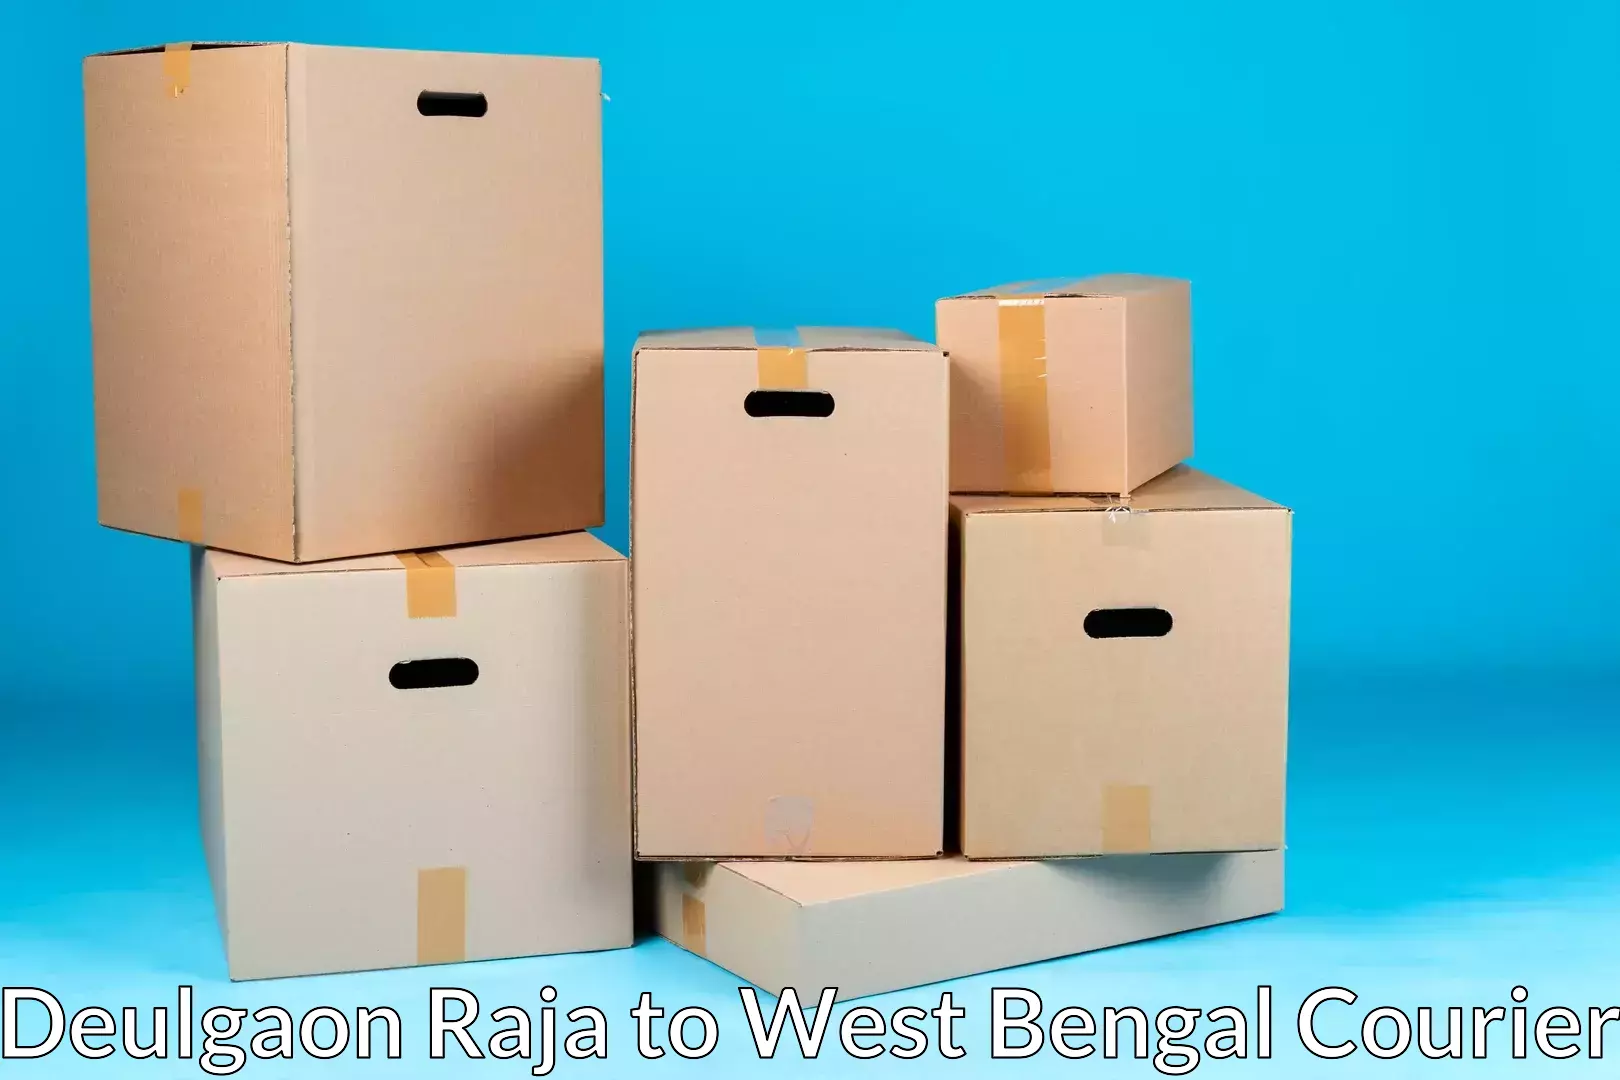 Residential moving experts Deulgaon Raja to West Bengal